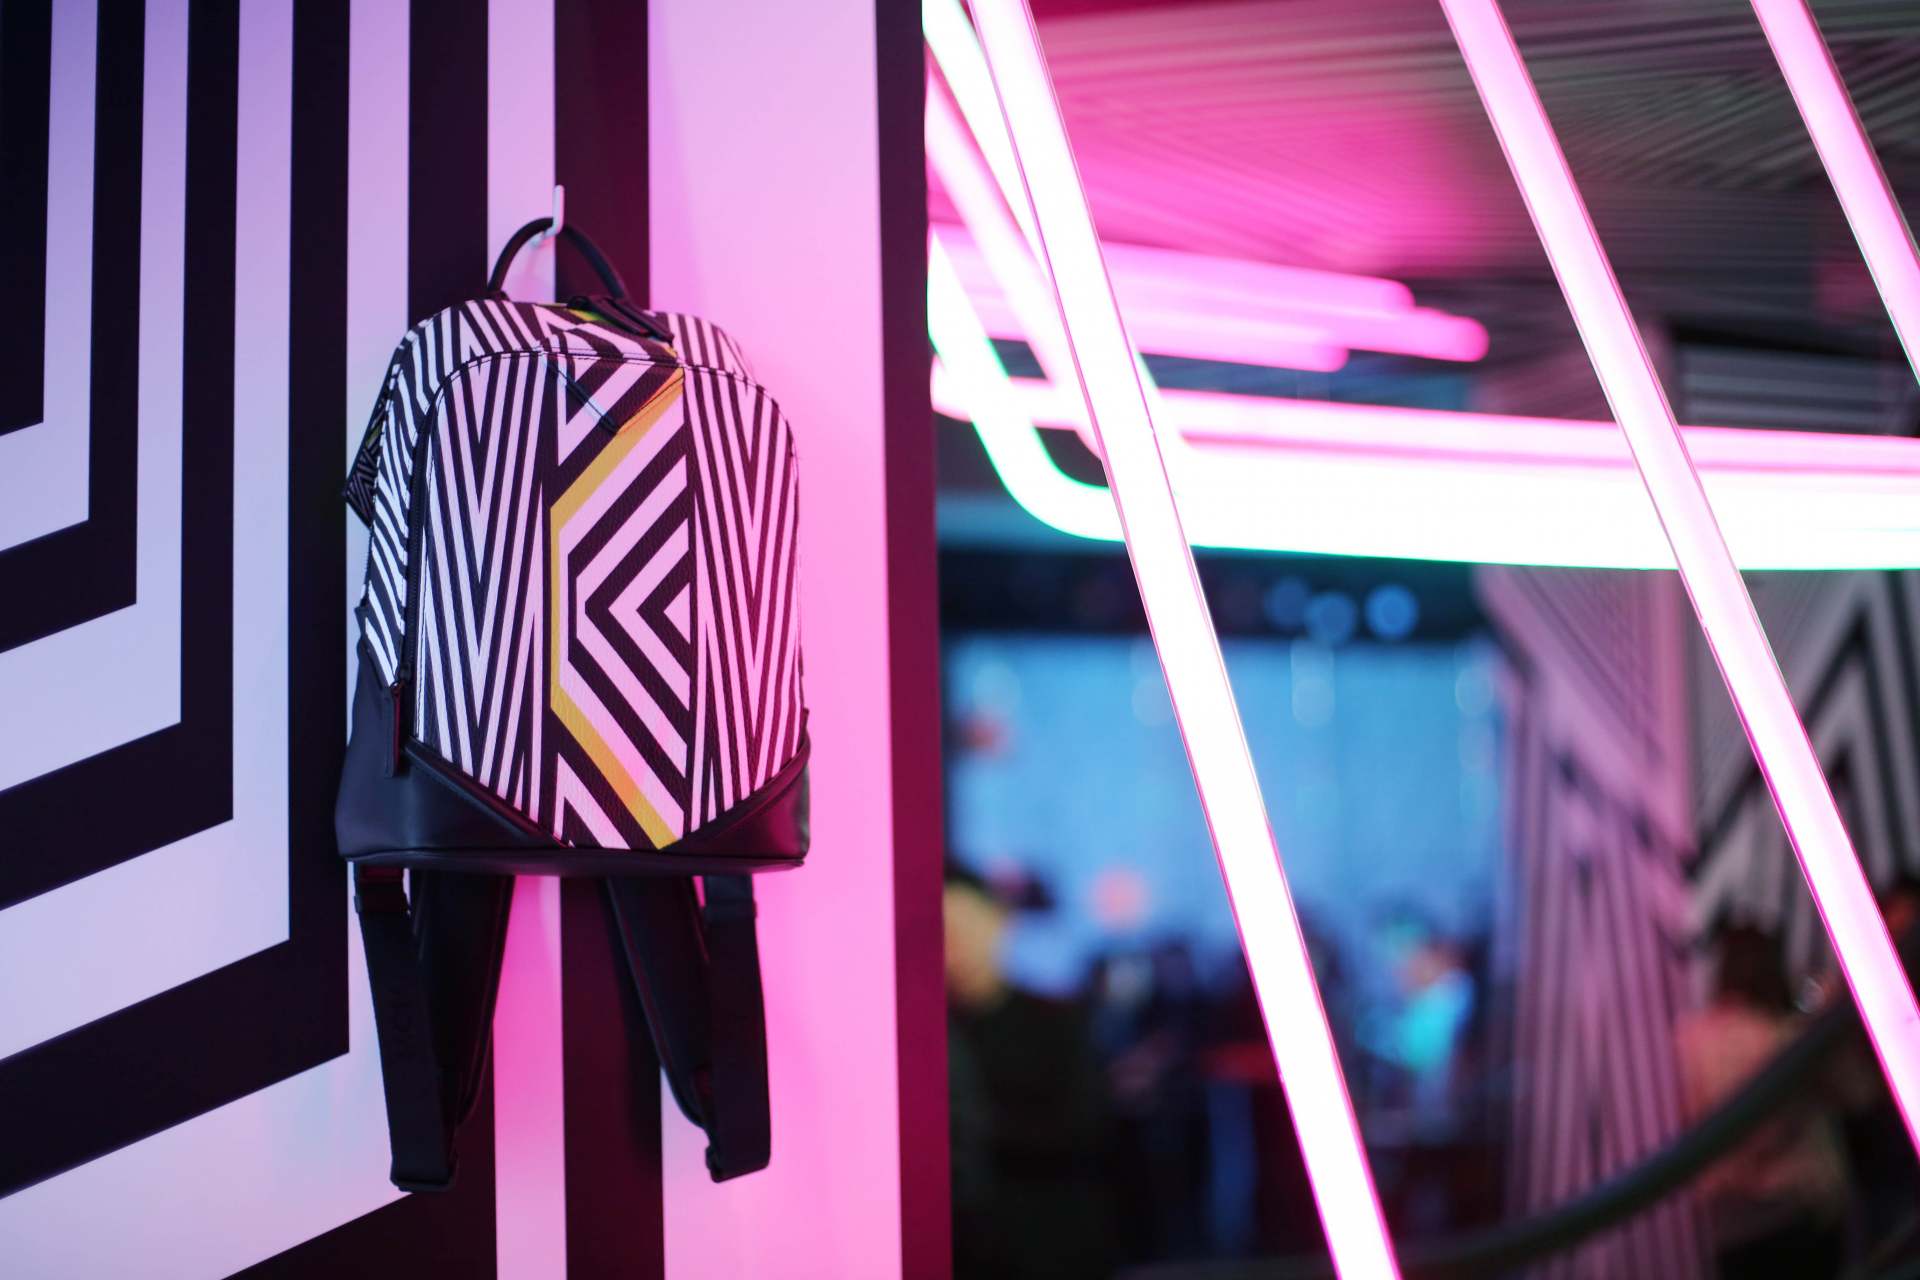 mcm x tobias rehberger event in Hong Kong inthefrow